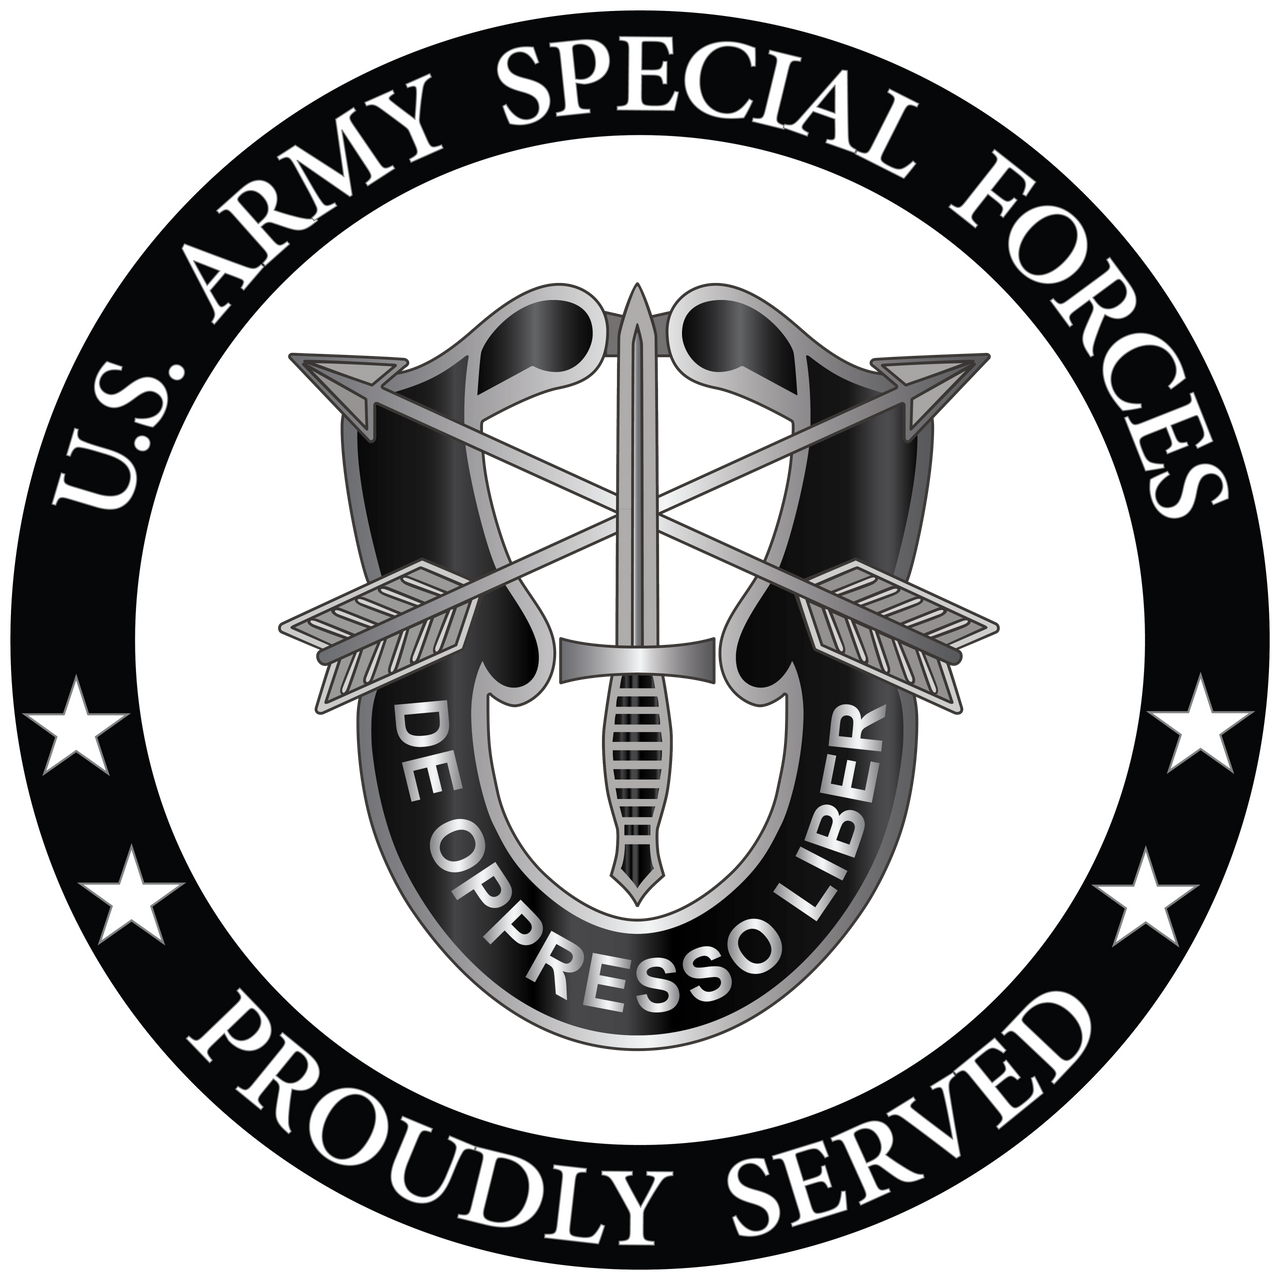 Us Army Special Forces Vinyl Cut Decal